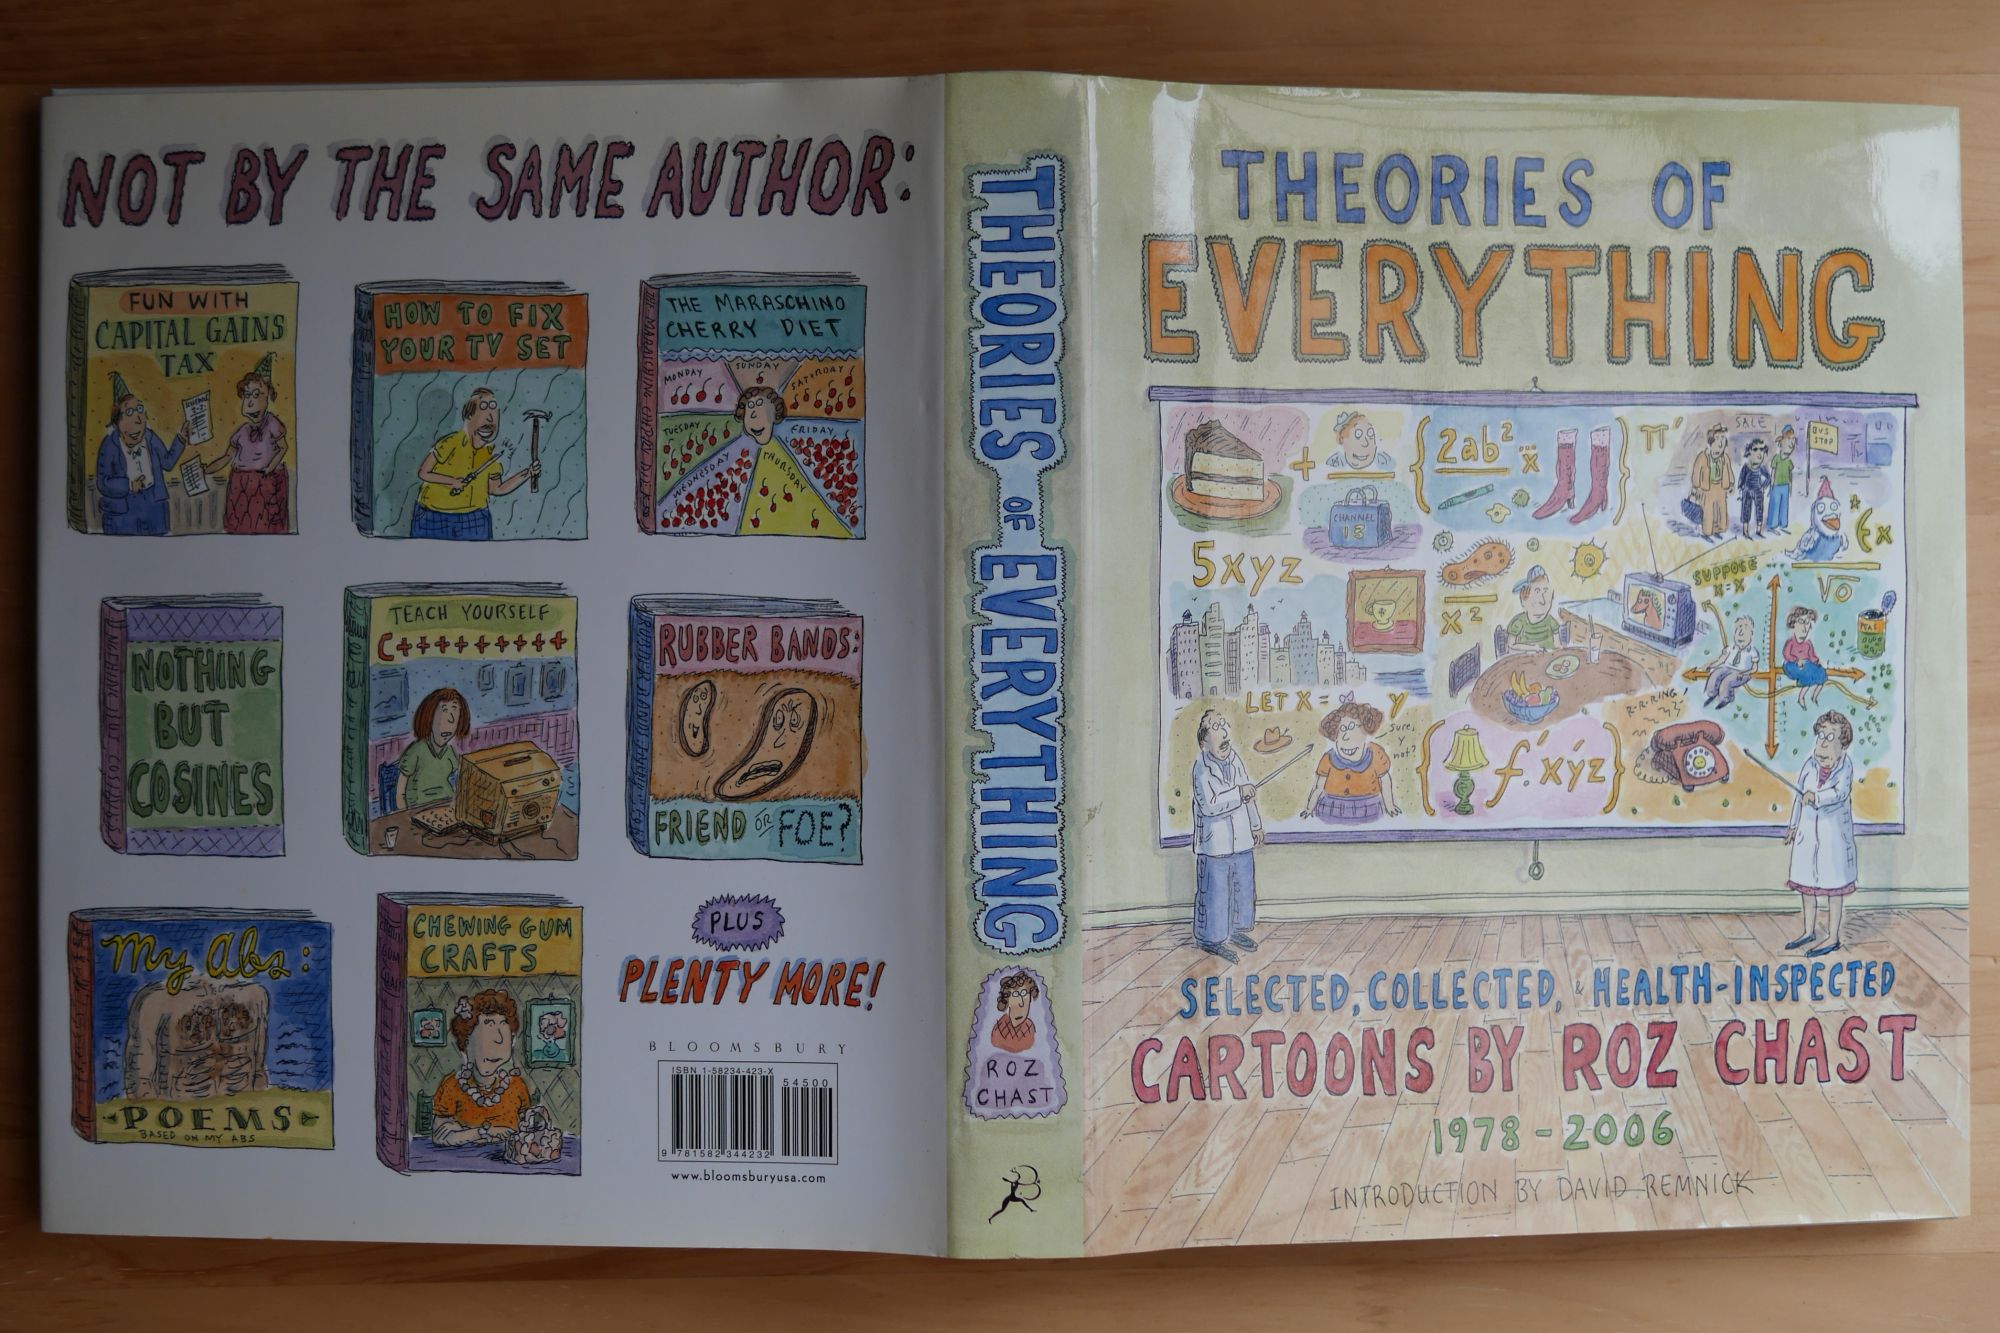 Roz Chast『Theories of Everything: Selected, Collected, and Health-Inspected Cartoons, 1978-2006』（2008年、Bloomsbury）01